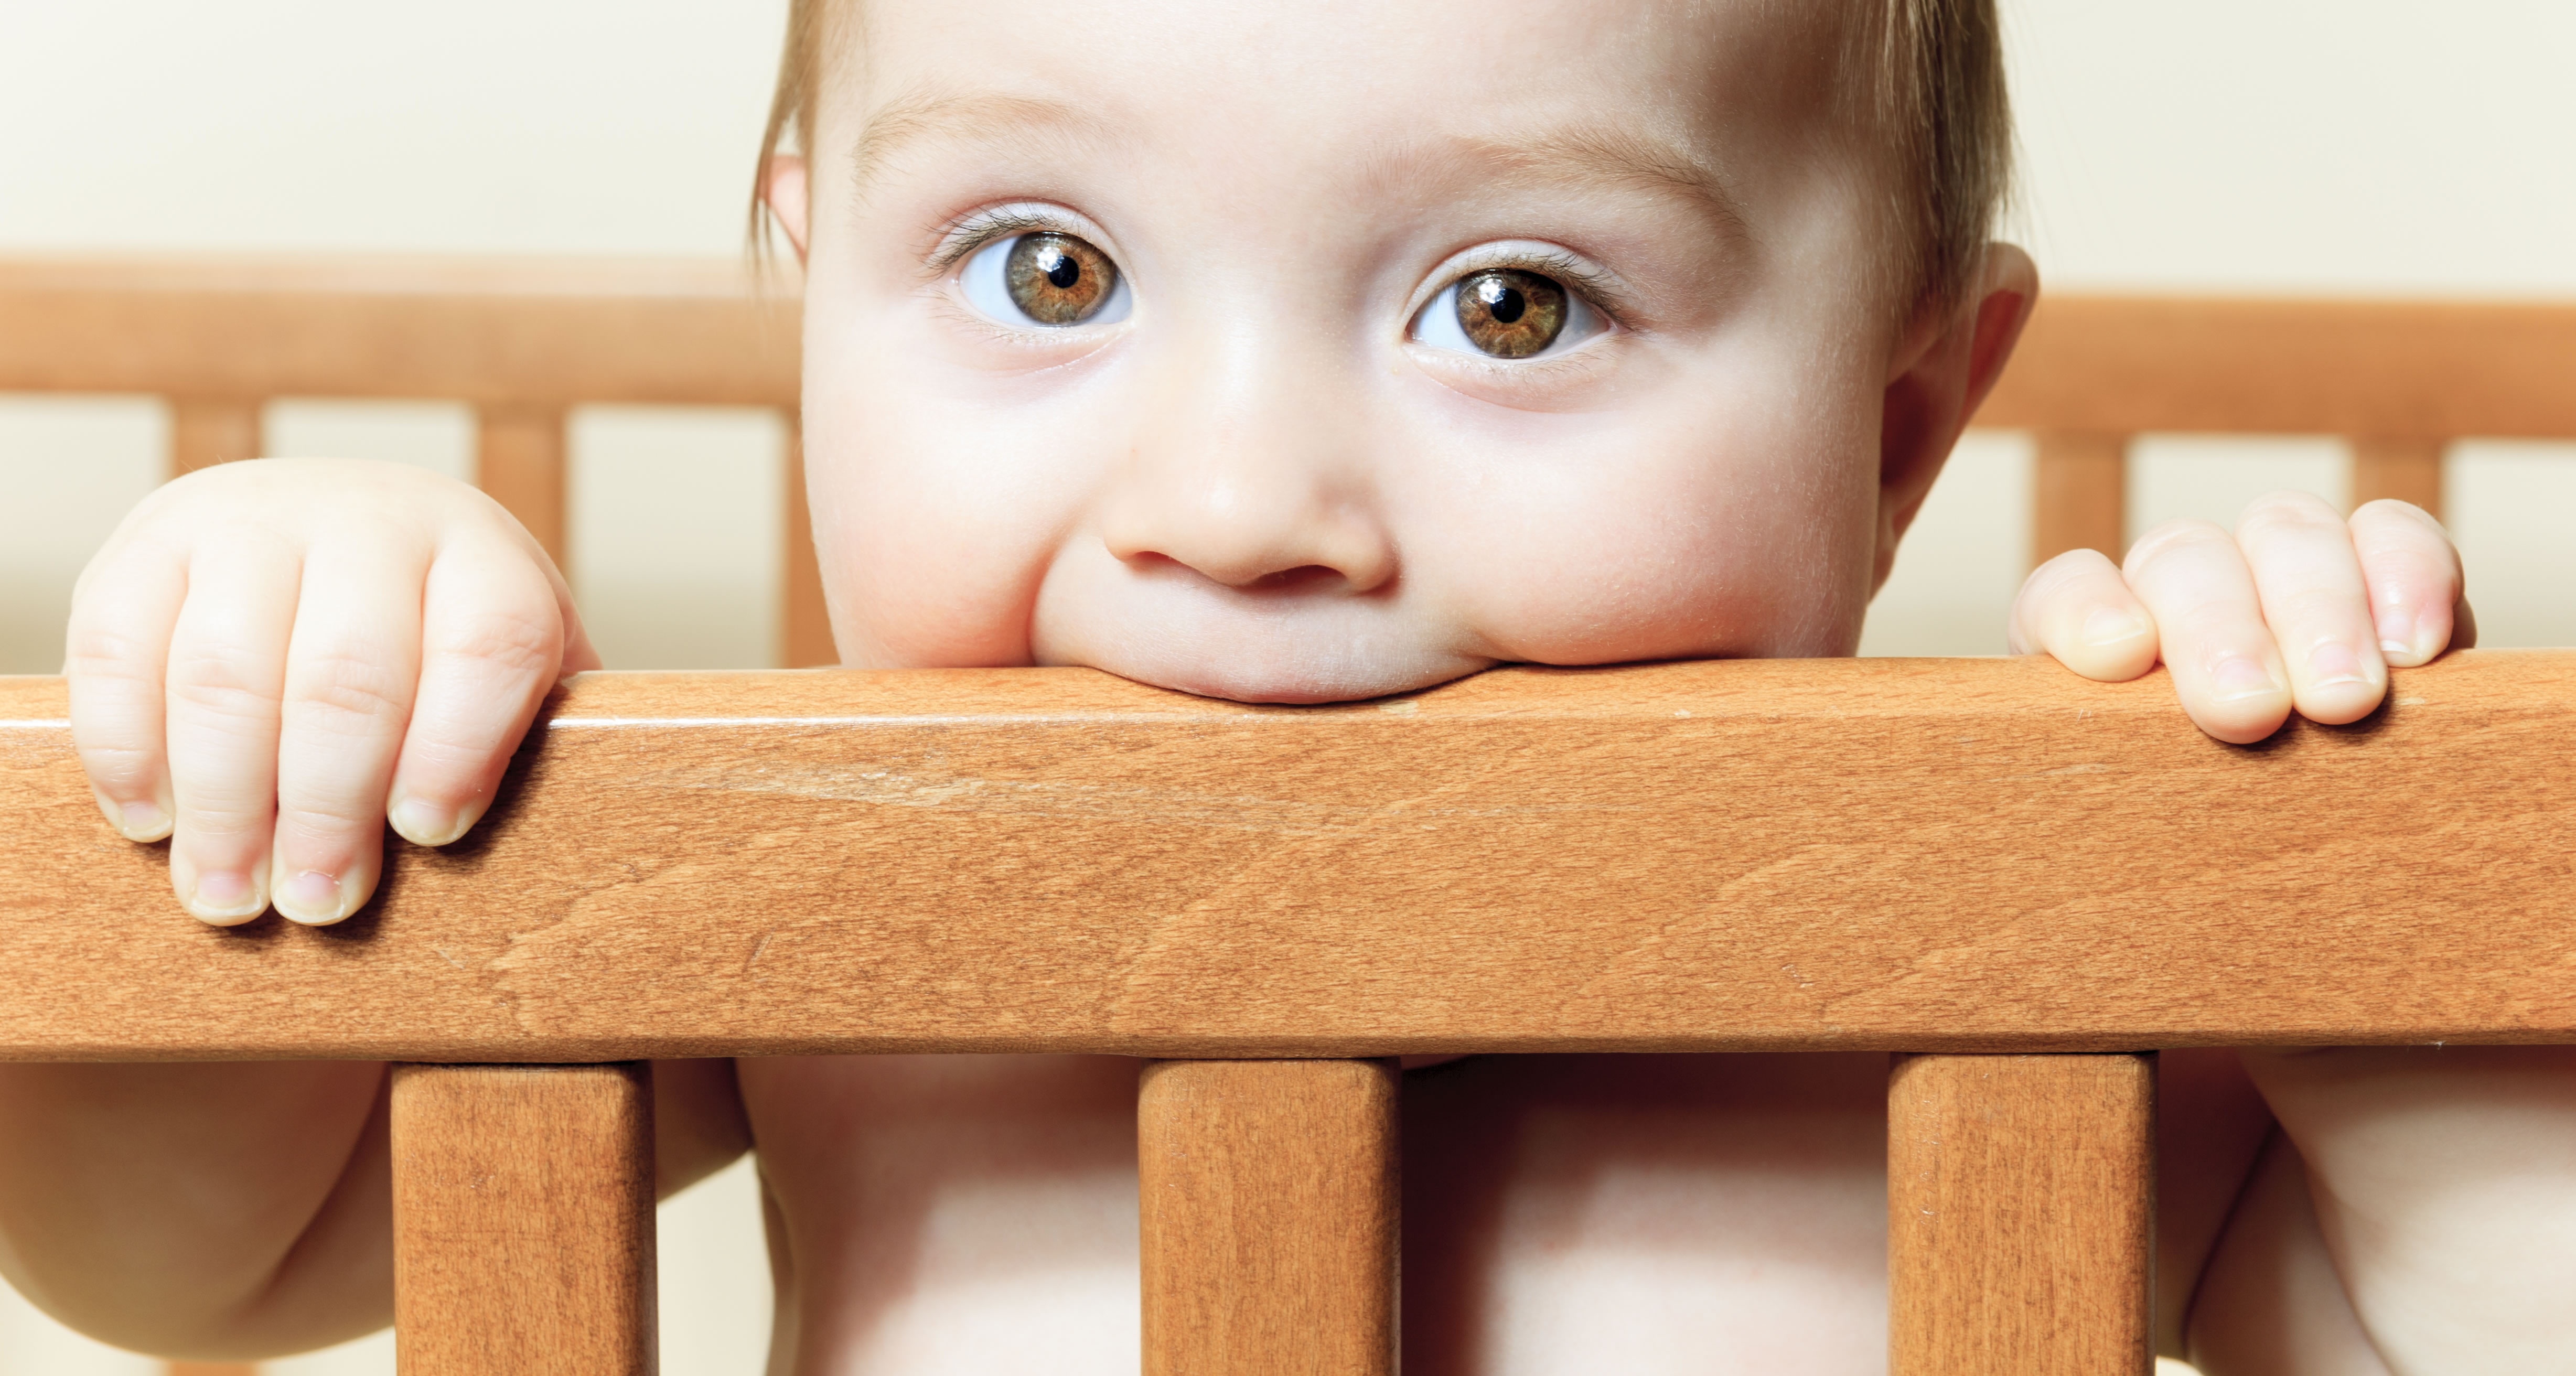 Healthy tips for soothing a teething baby